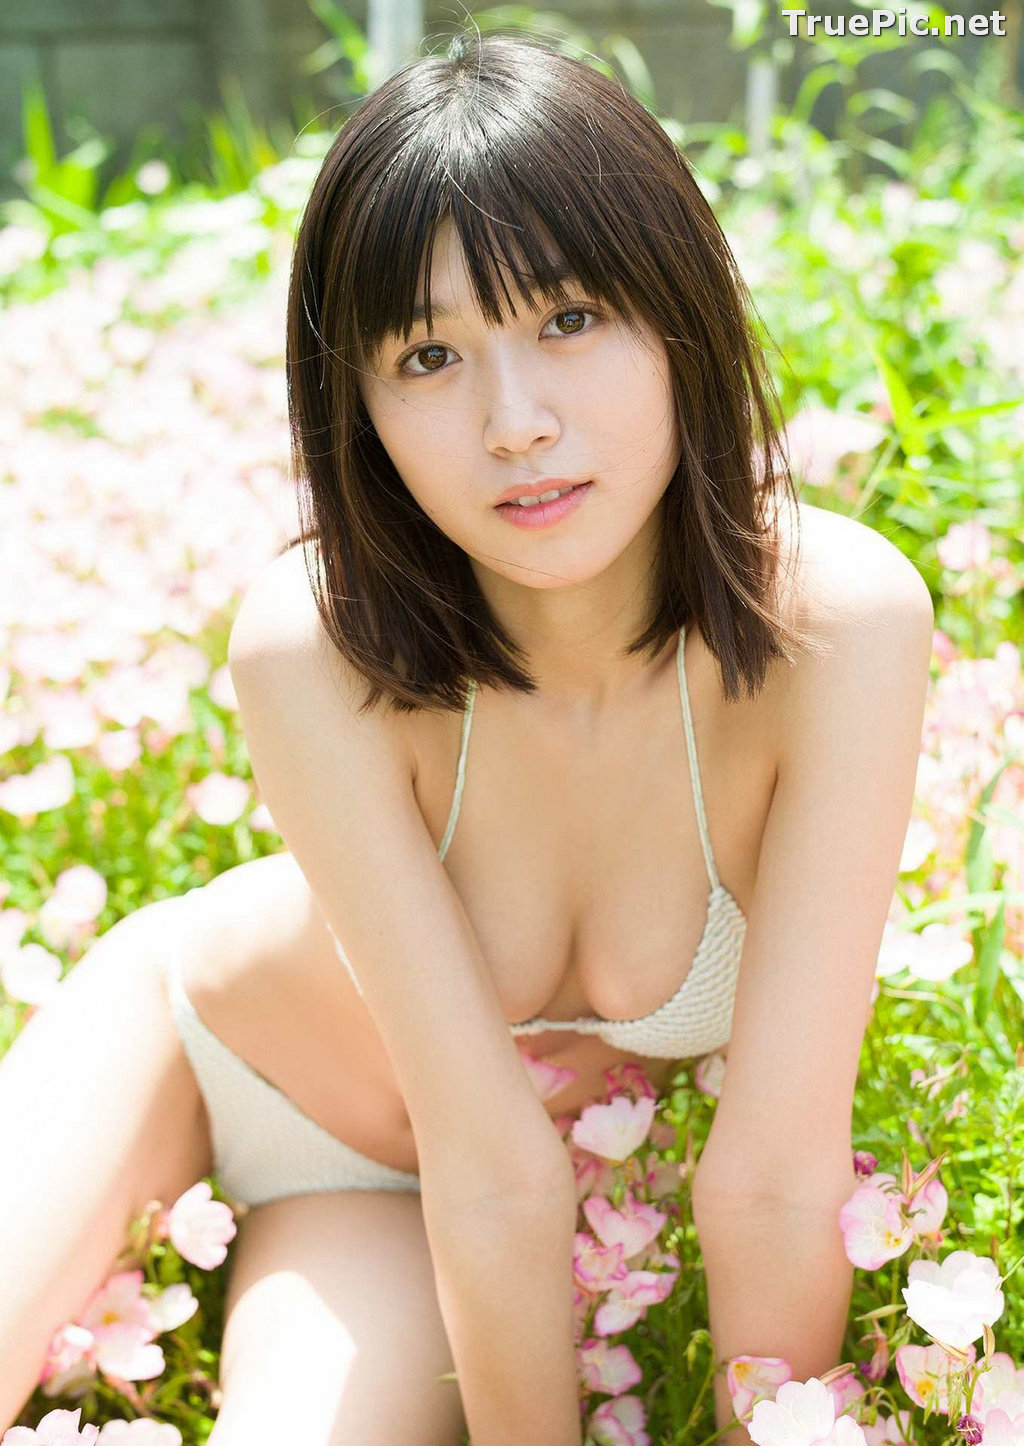 ImageJapanese Gravure Idol and Actress - Kitamuki Miyu (北向珠夕) - Sexy Picture Collection 2020 - TruePic.net - Picture-50